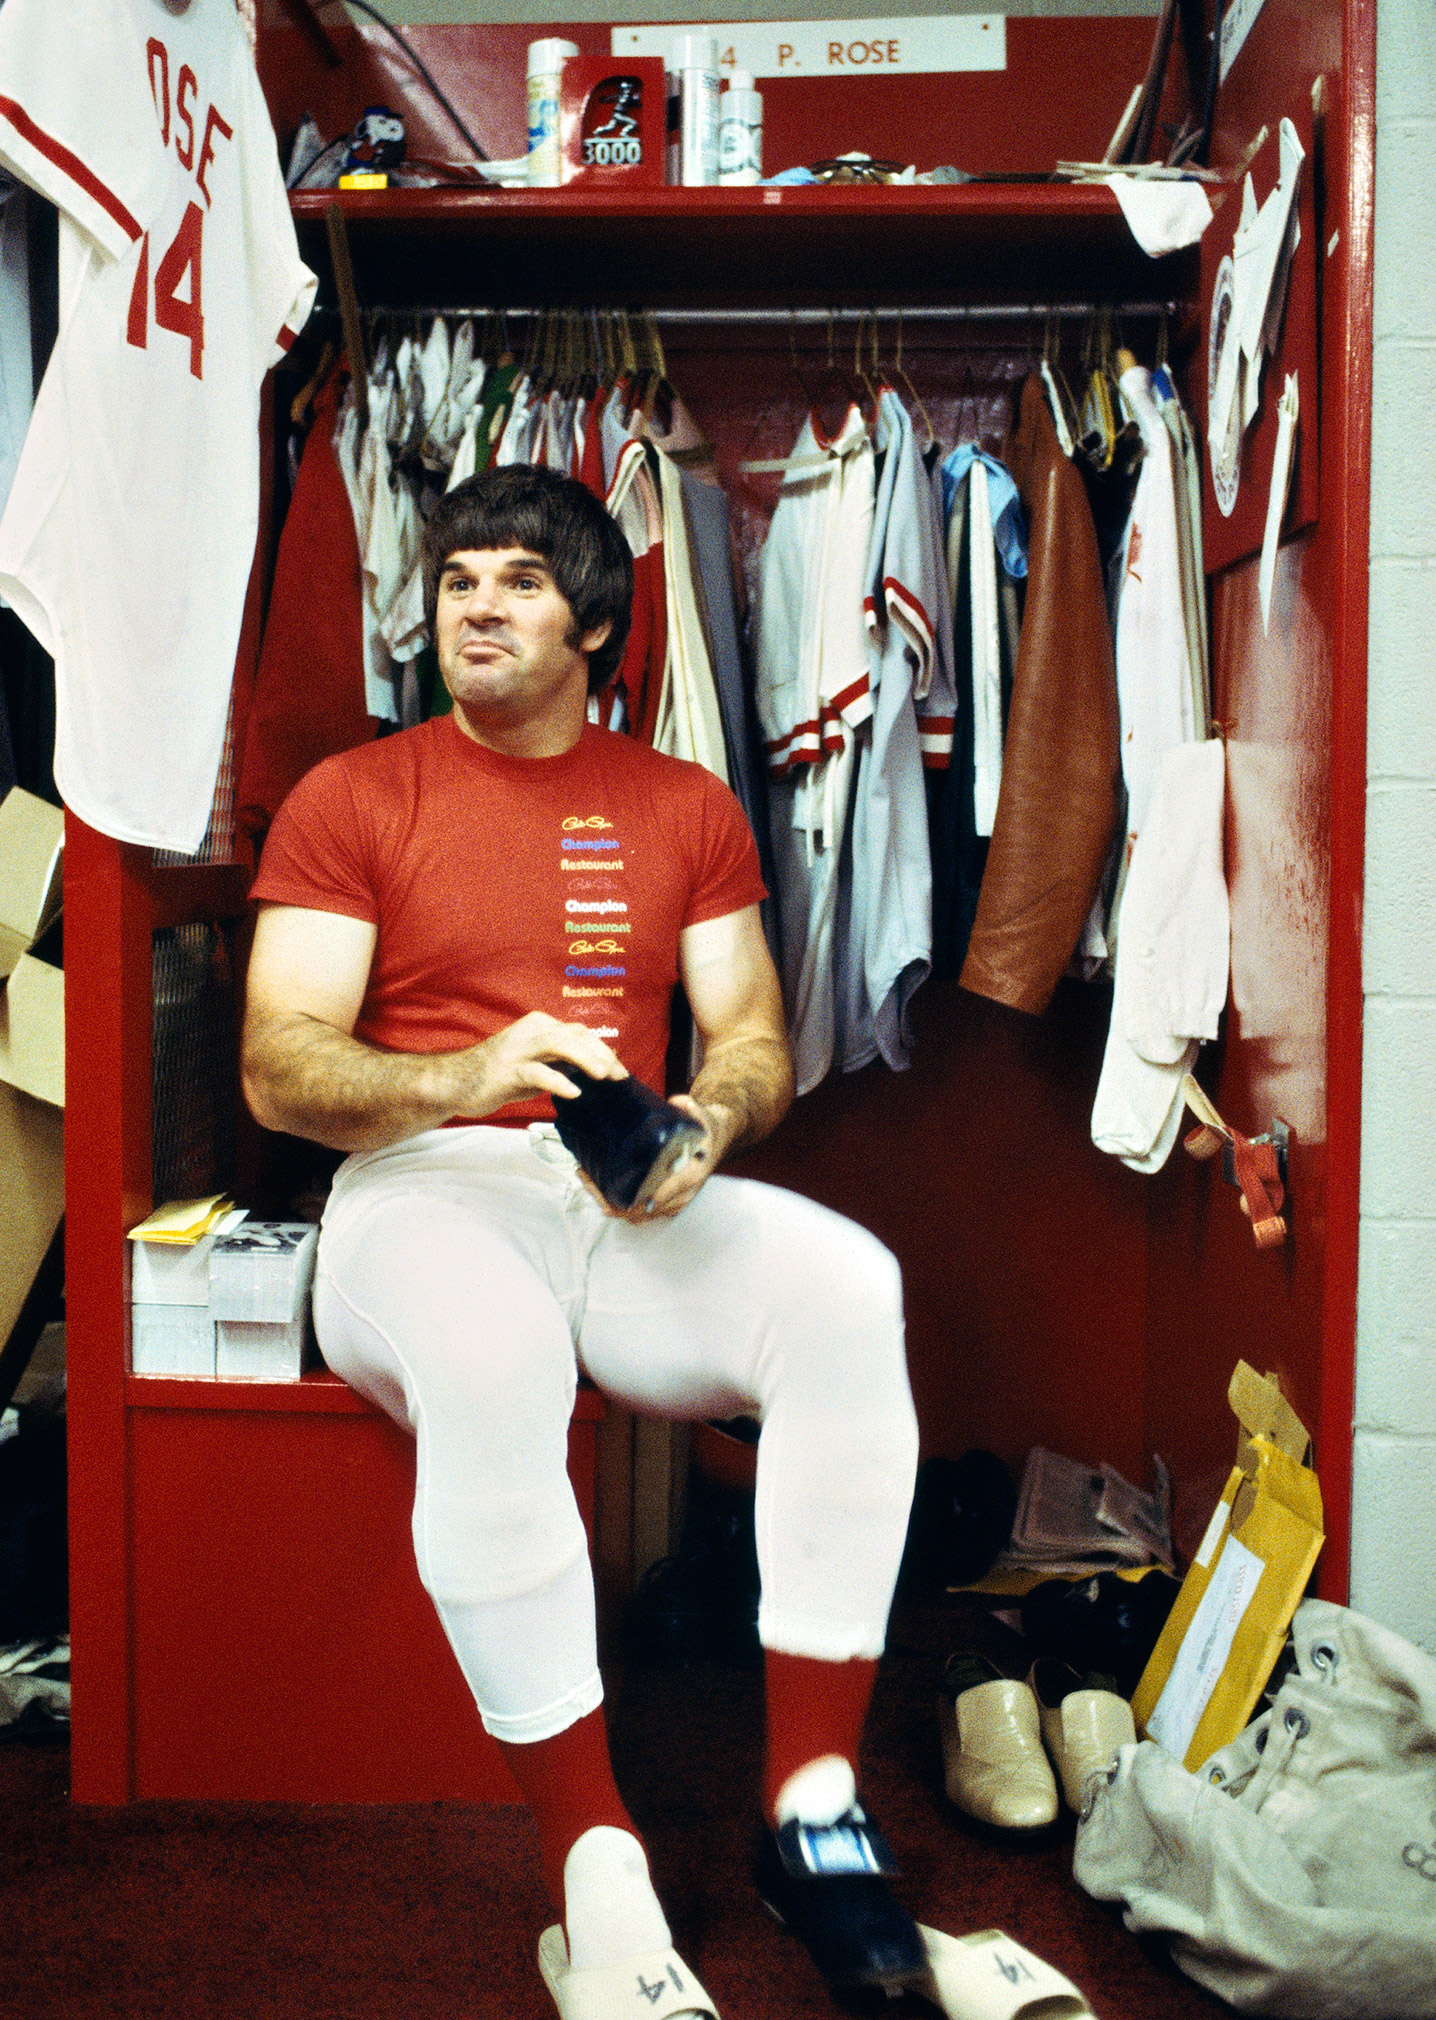 The Ambassador - Gallery: Pete Rose, The Player - ESPN